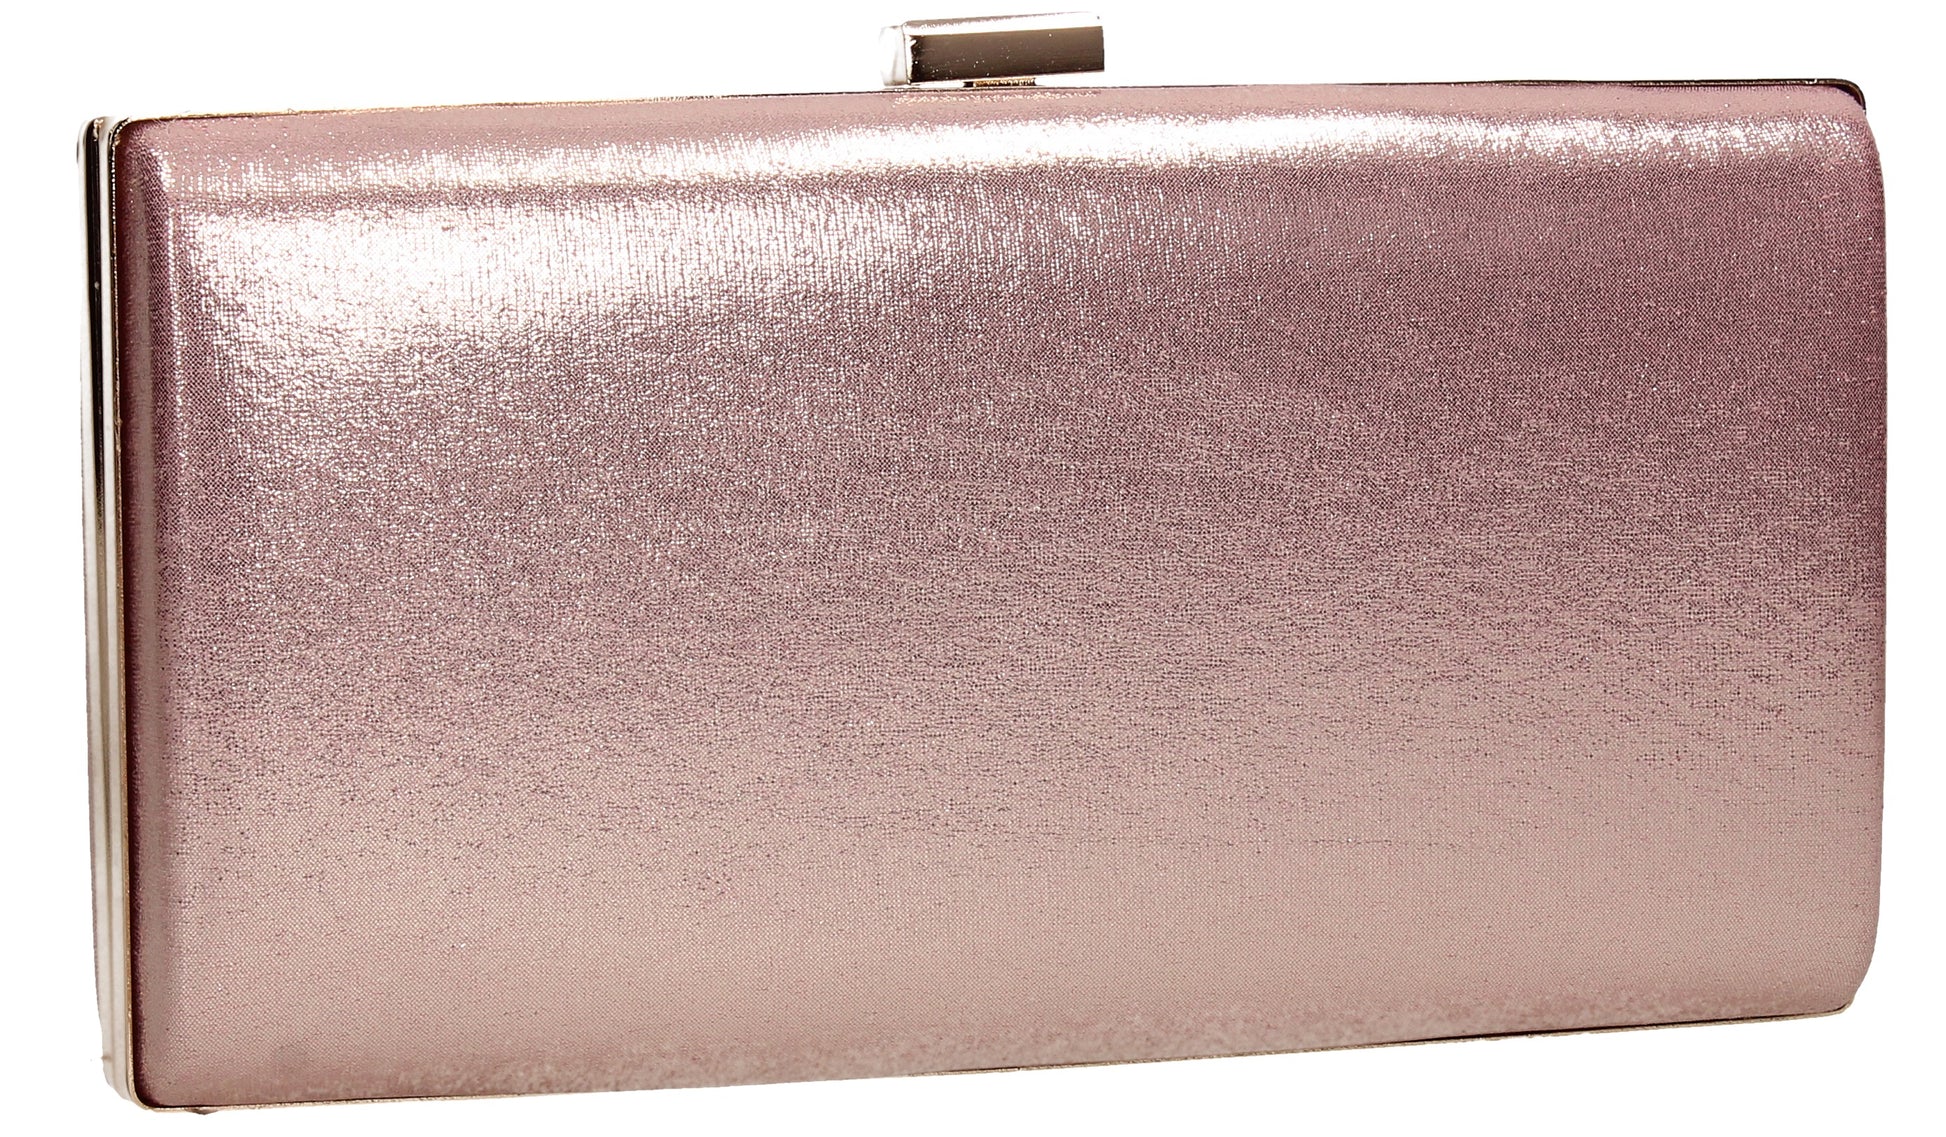 SWANKYSWANS Payton Floral Detail Clutch Bag Pink Cute Cheap Clutch Bag For Weddings School and Work